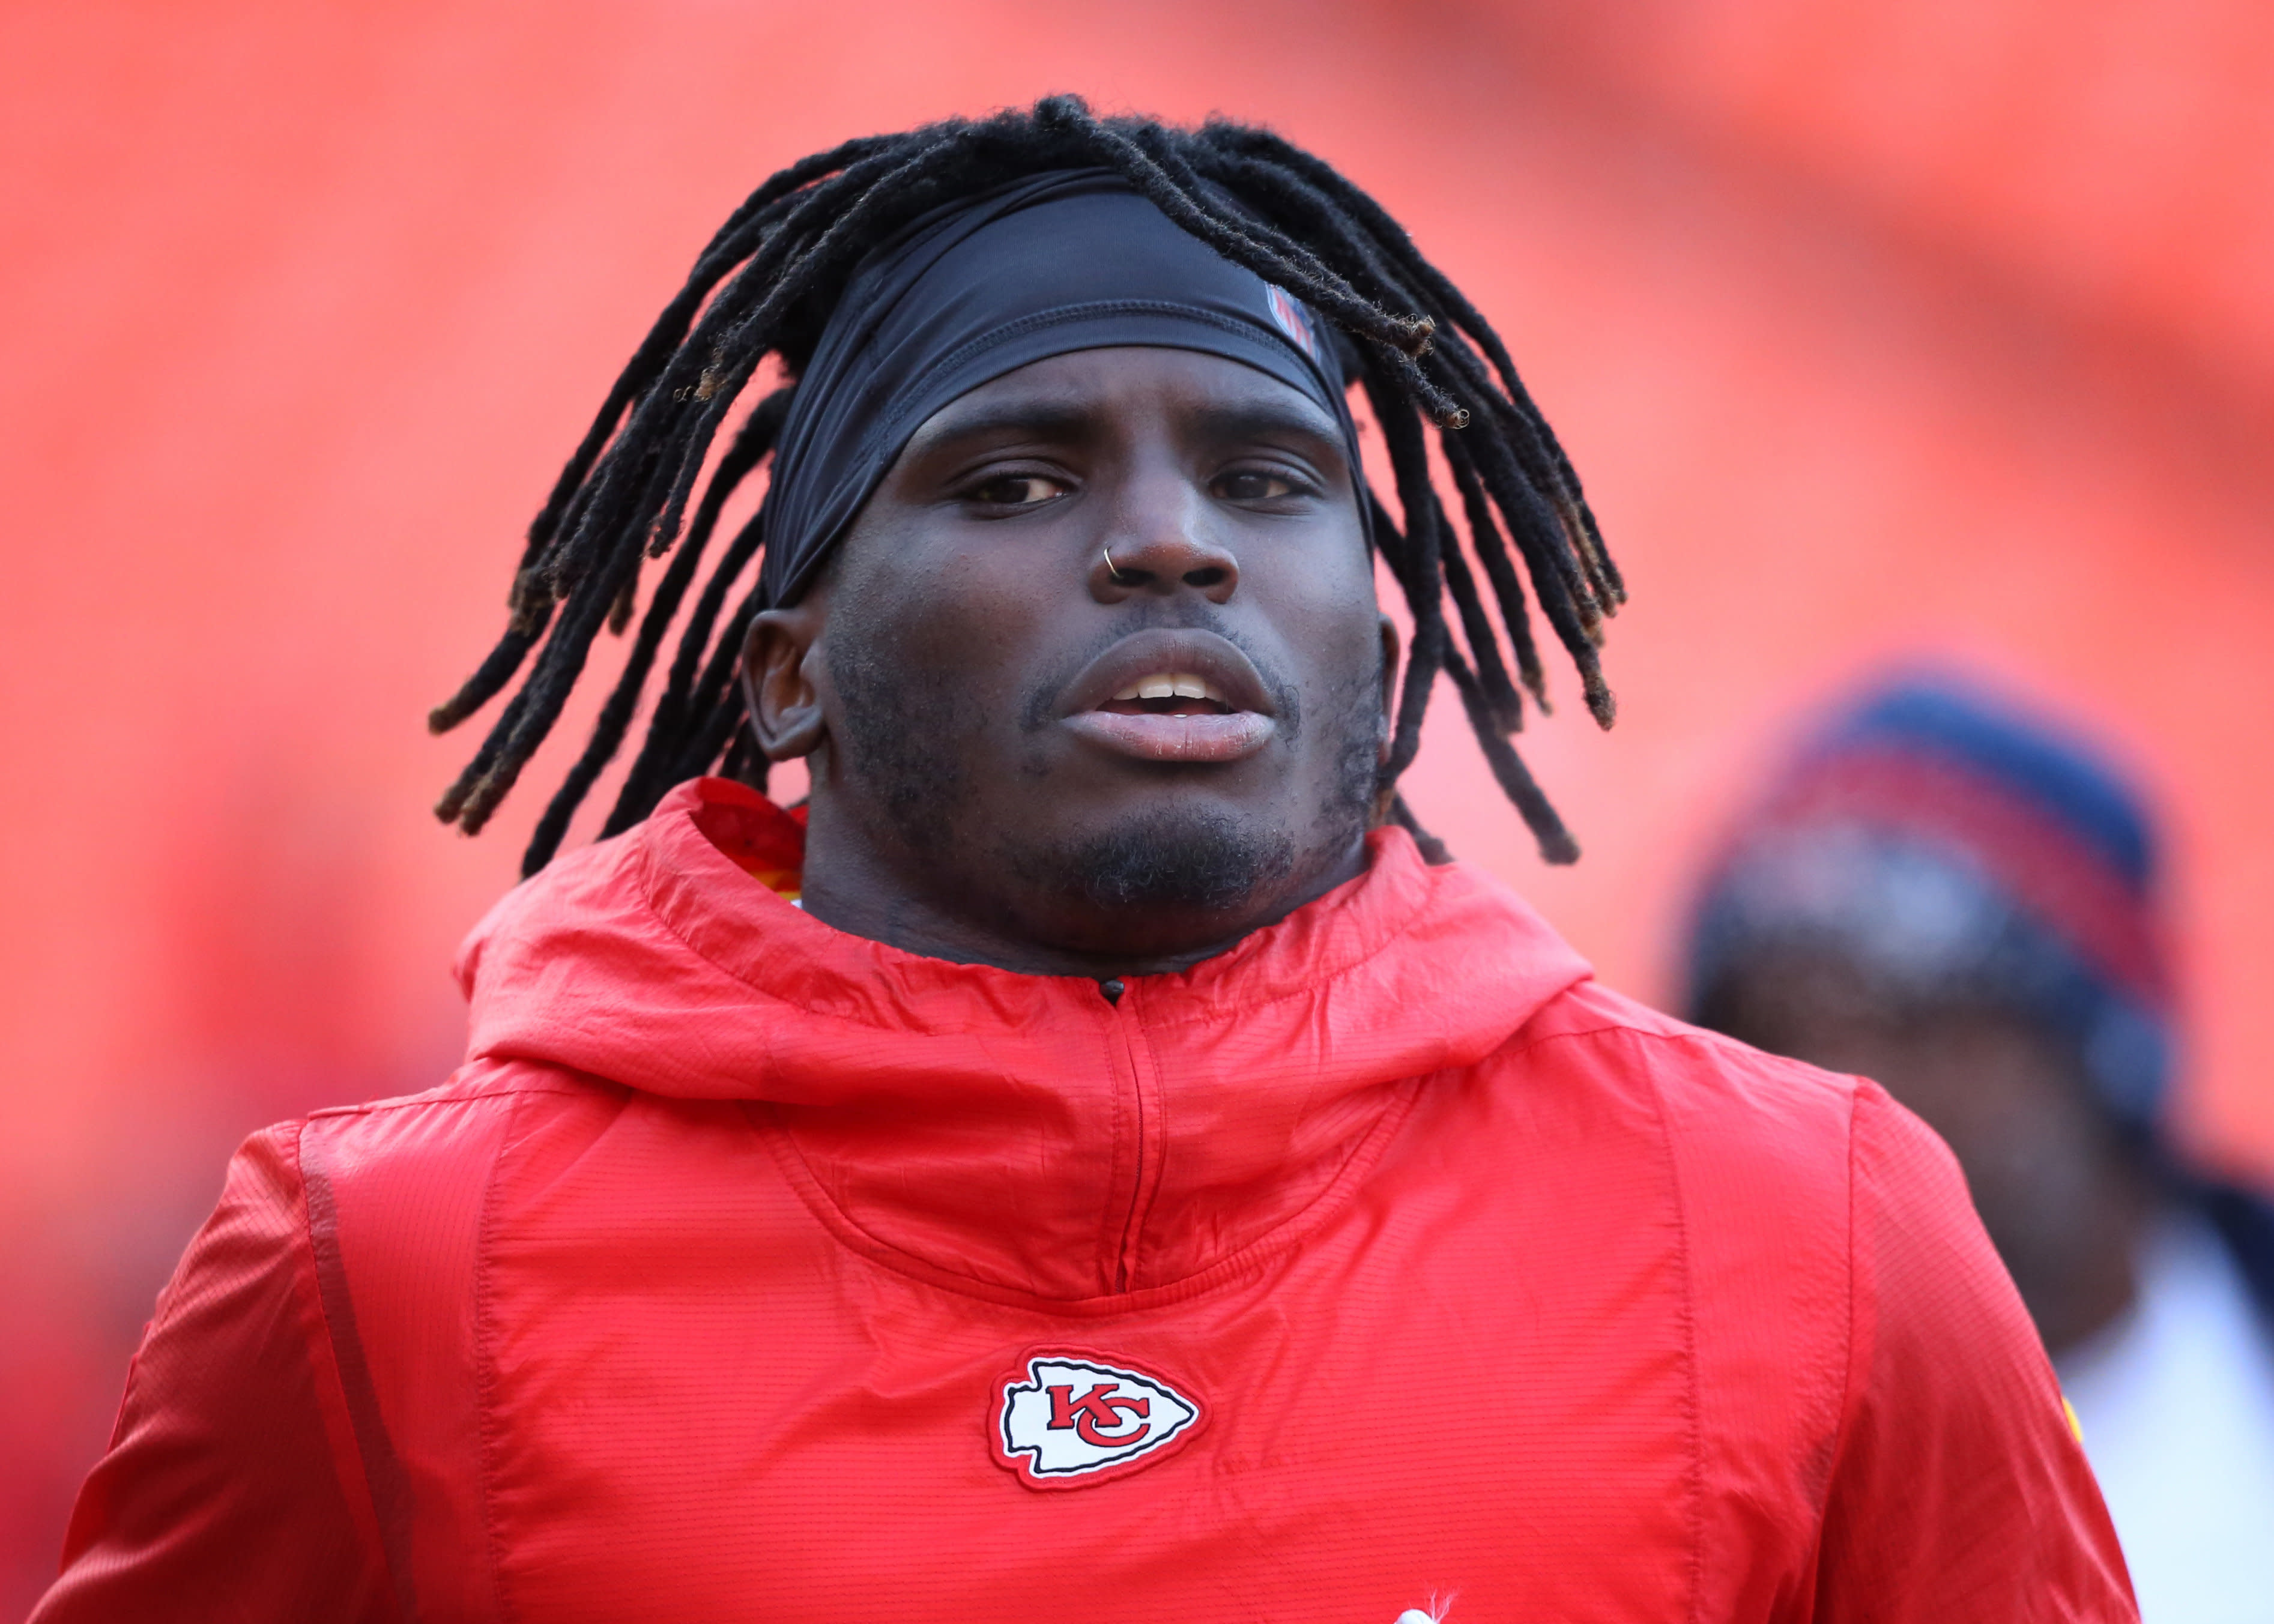 Tyreek Hill won't face charges over child abuse allegations